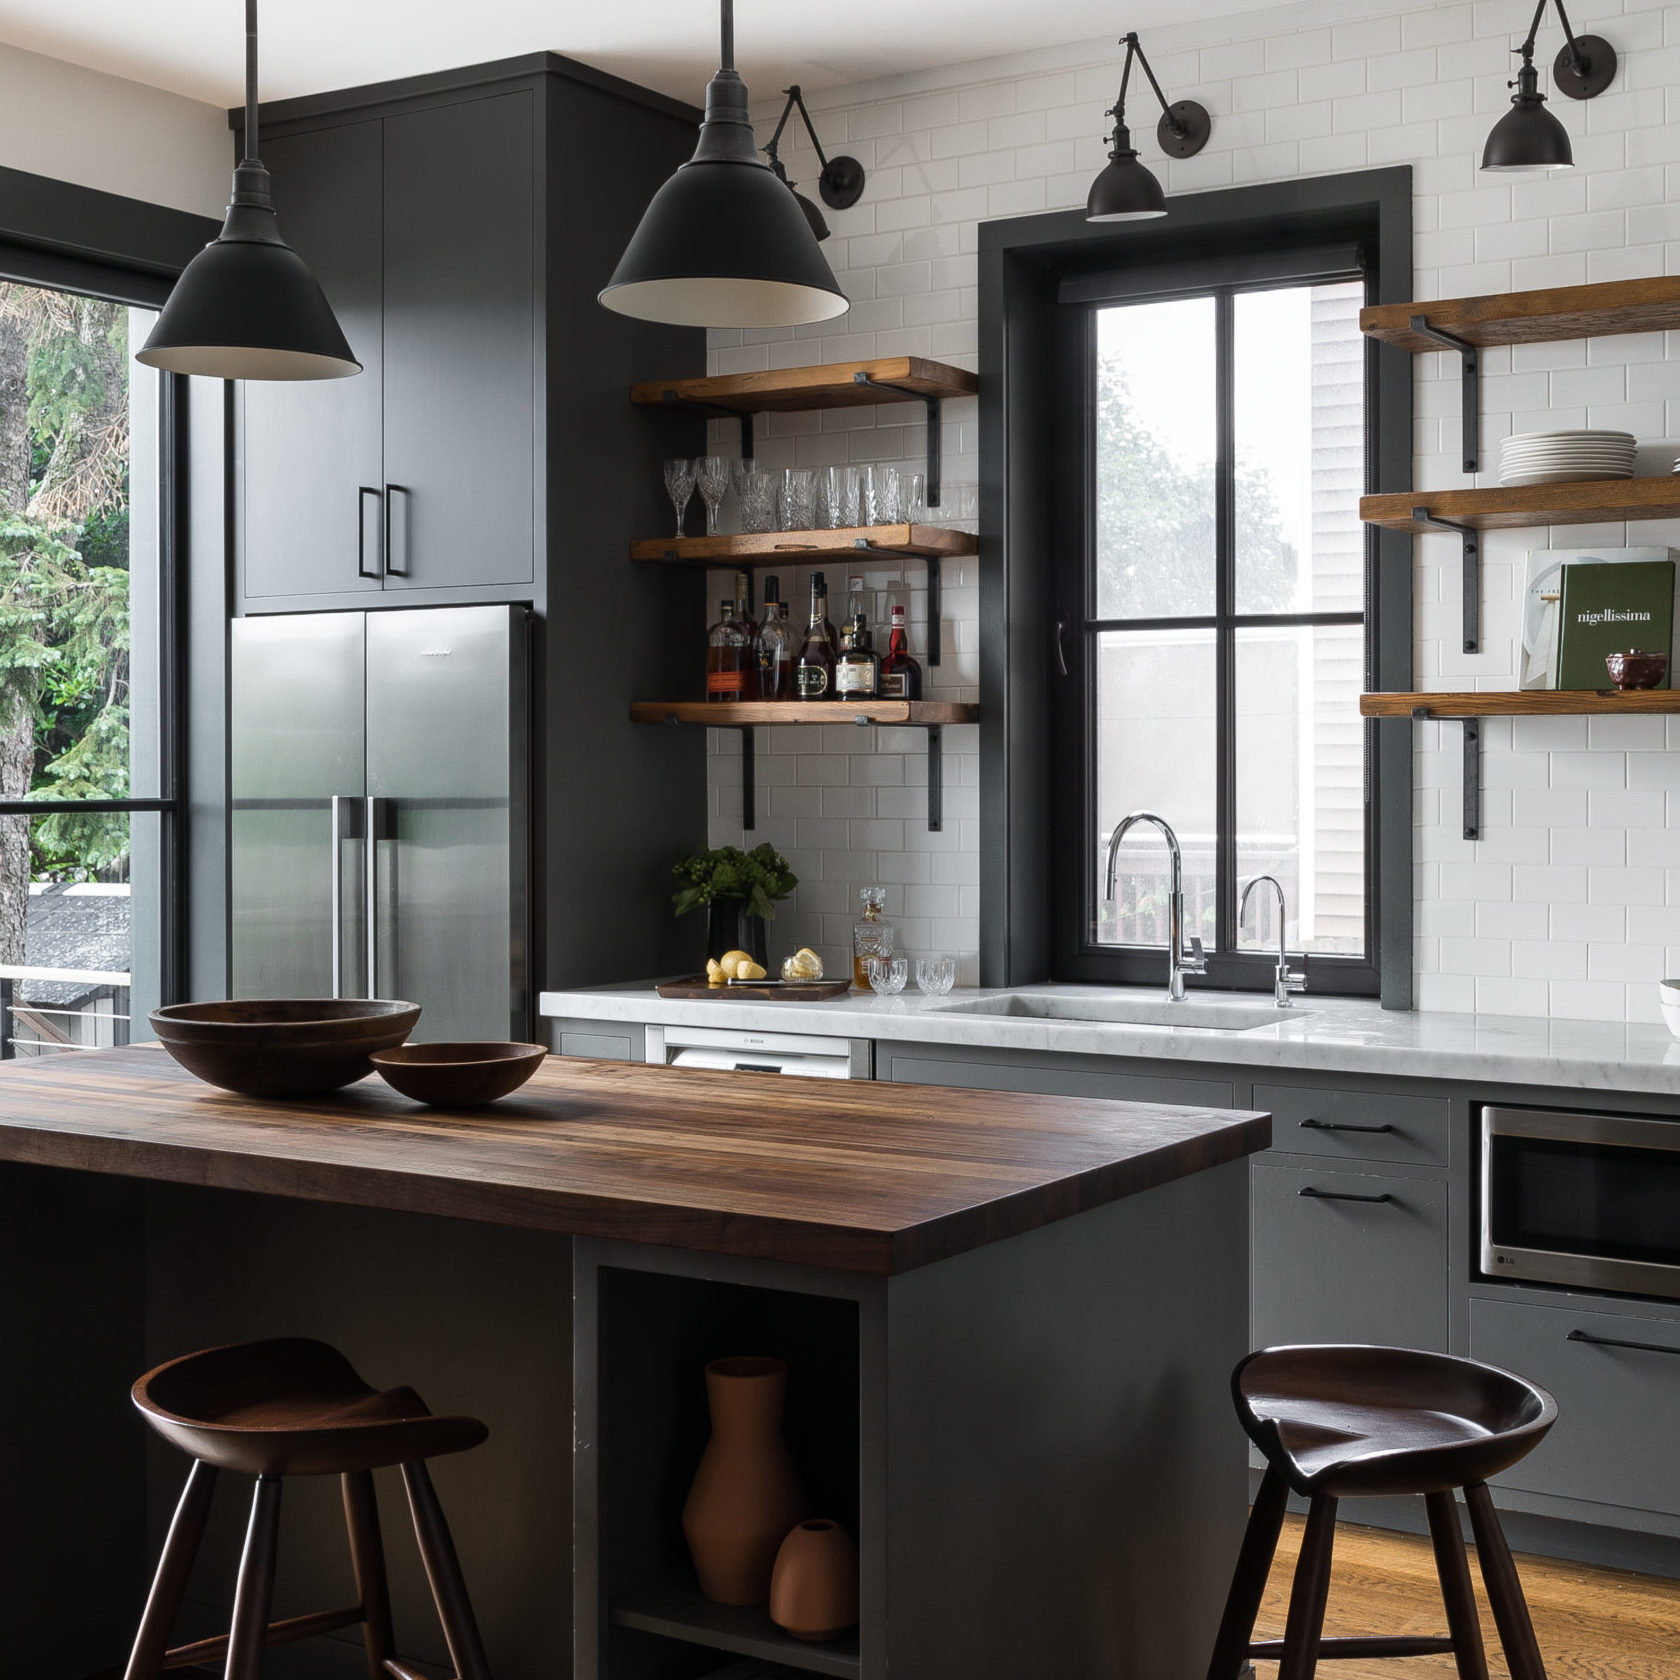 Industrial And The Sleek Organic Cabinetry